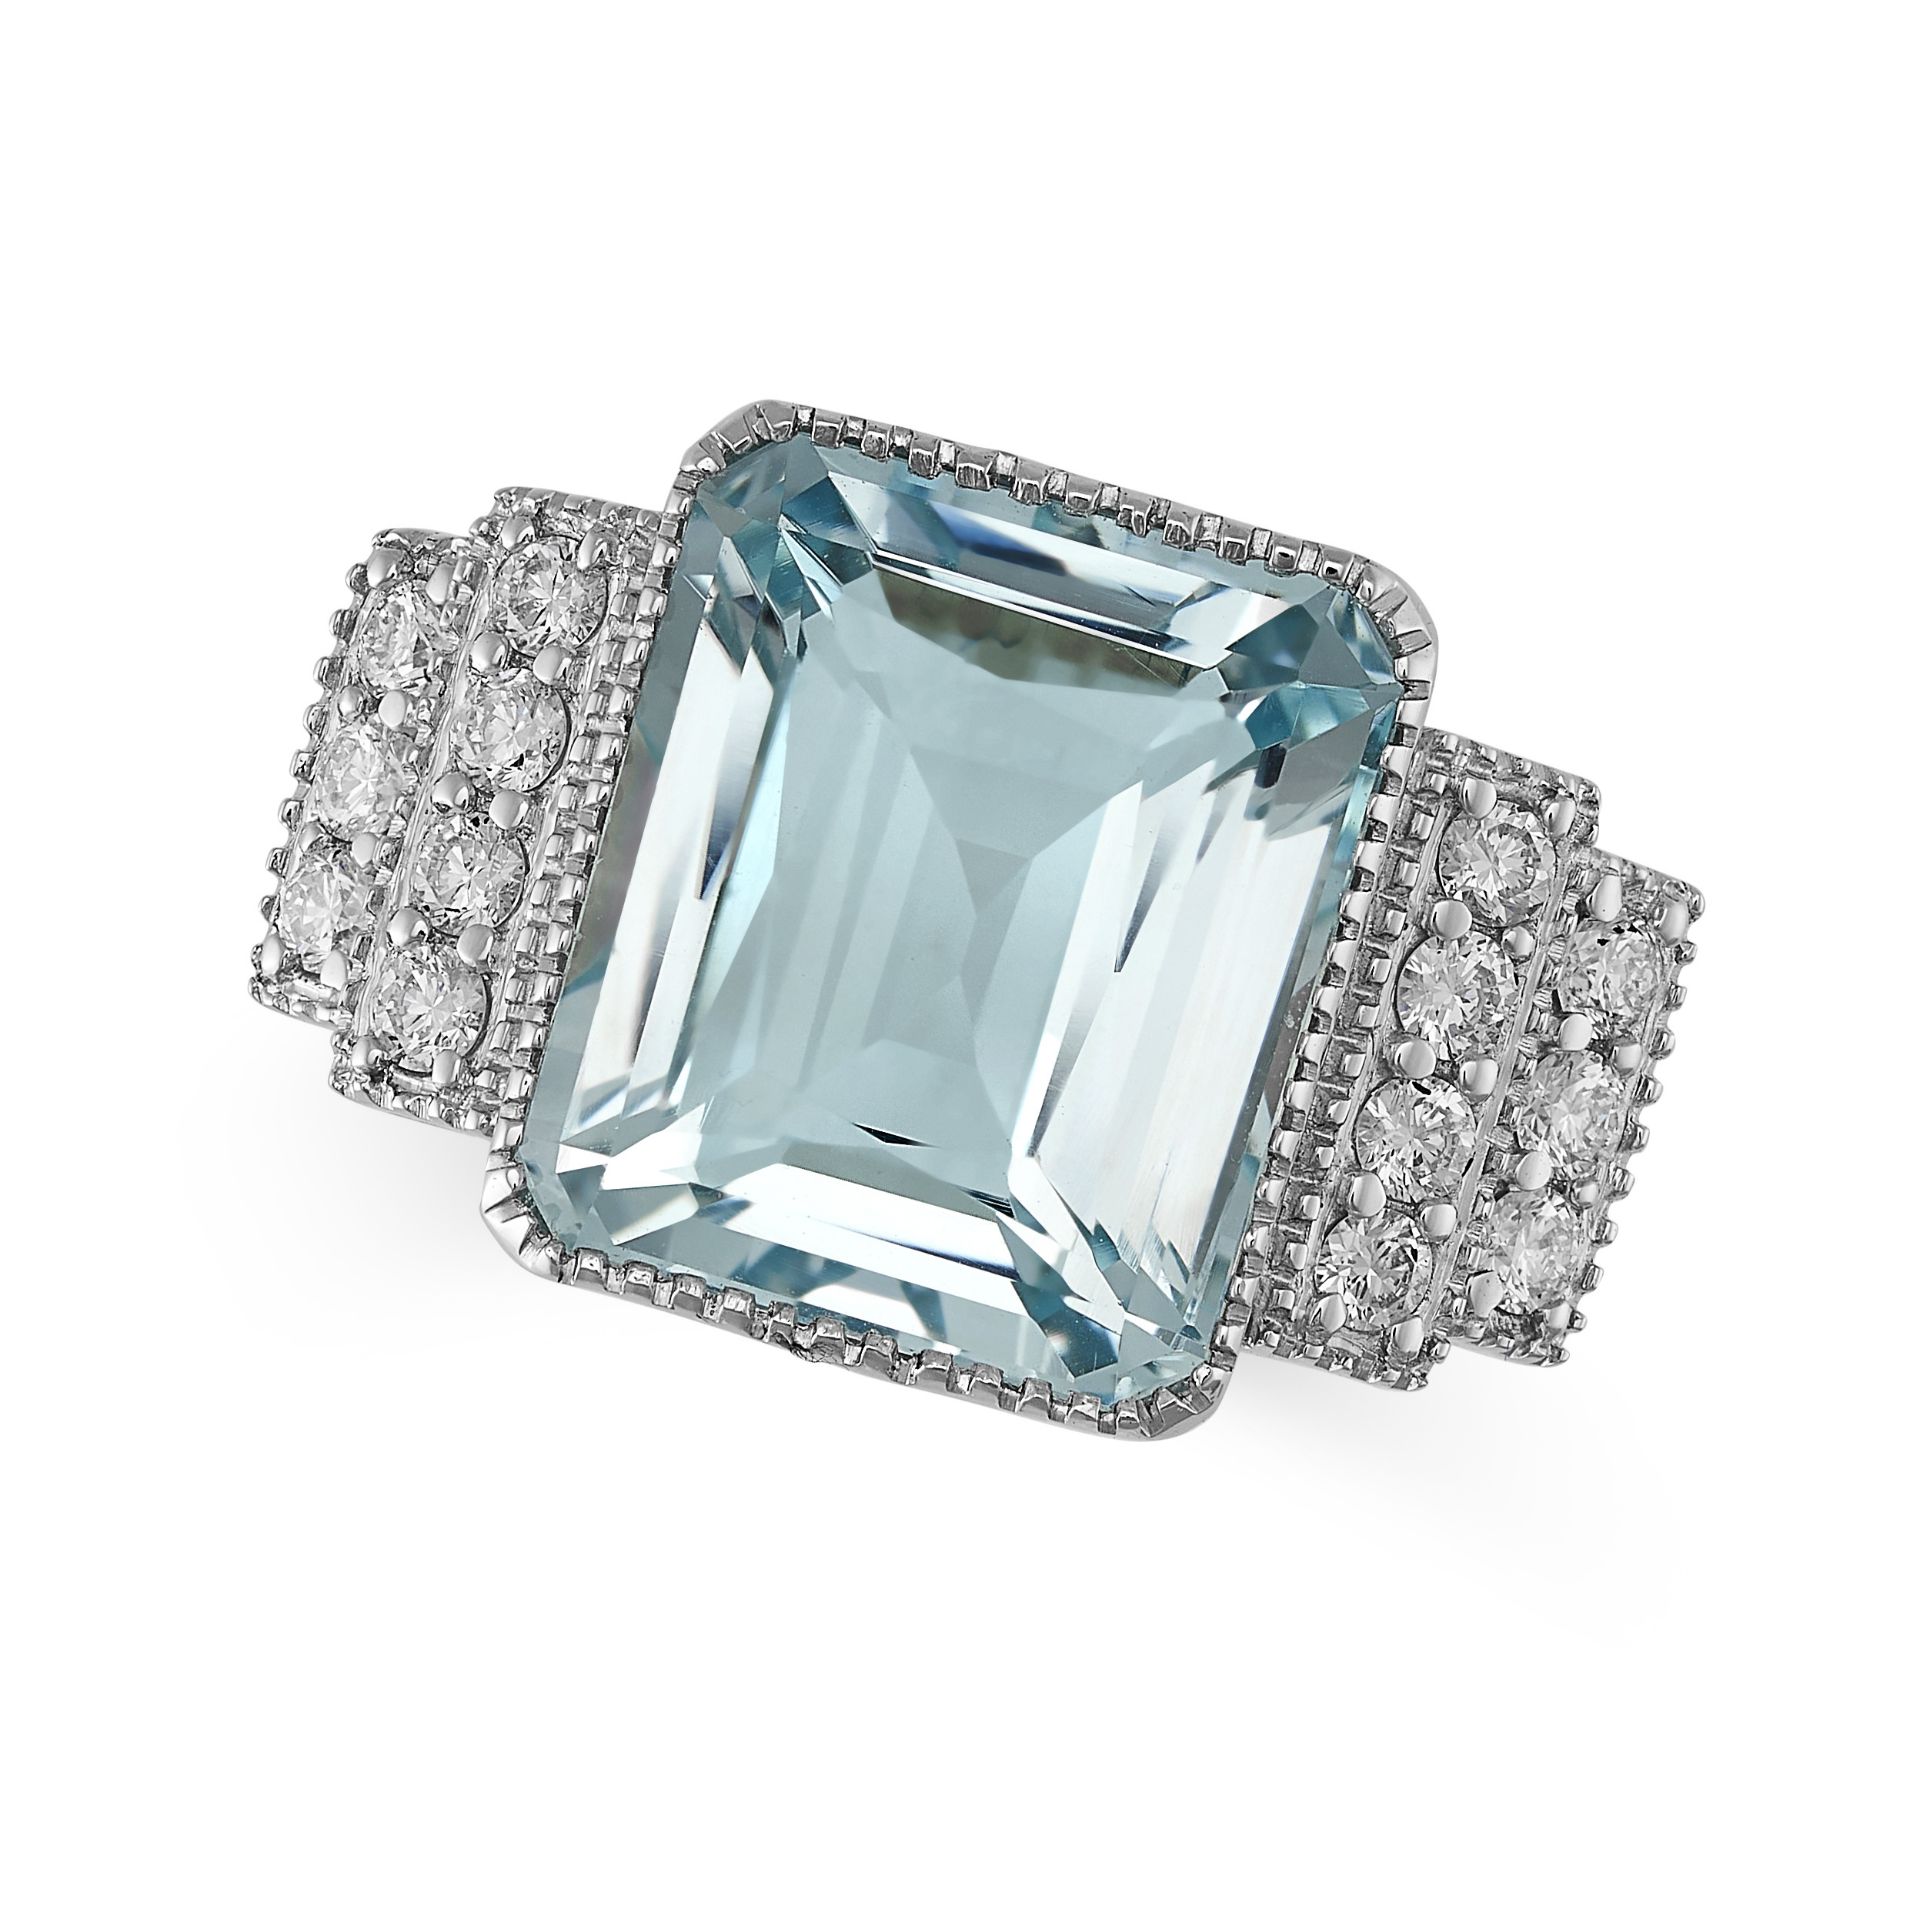 AN AQUAMARINE AND DIAMOND RING set with an octagonal cut aquamarine of 7.93 carats, the stepped